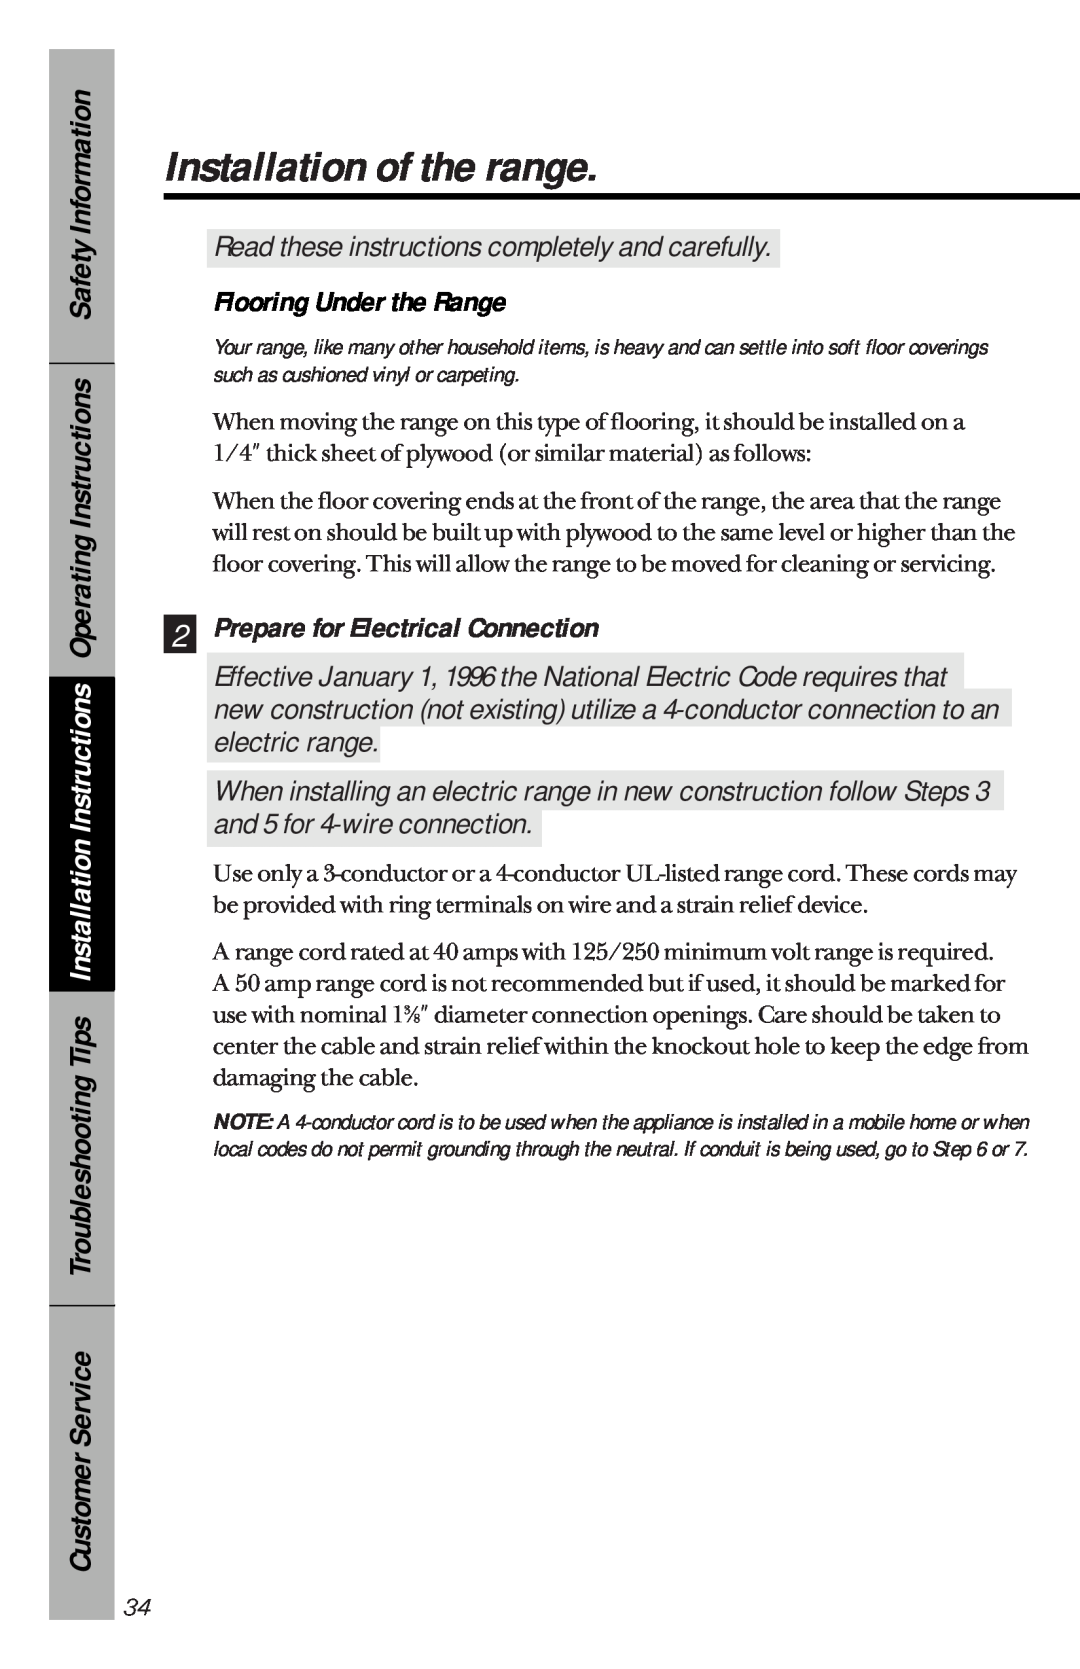 GE 164D3333P150 owner manual Flooring Under the Range, Prepare for Electrical Connection, Installation of the range 